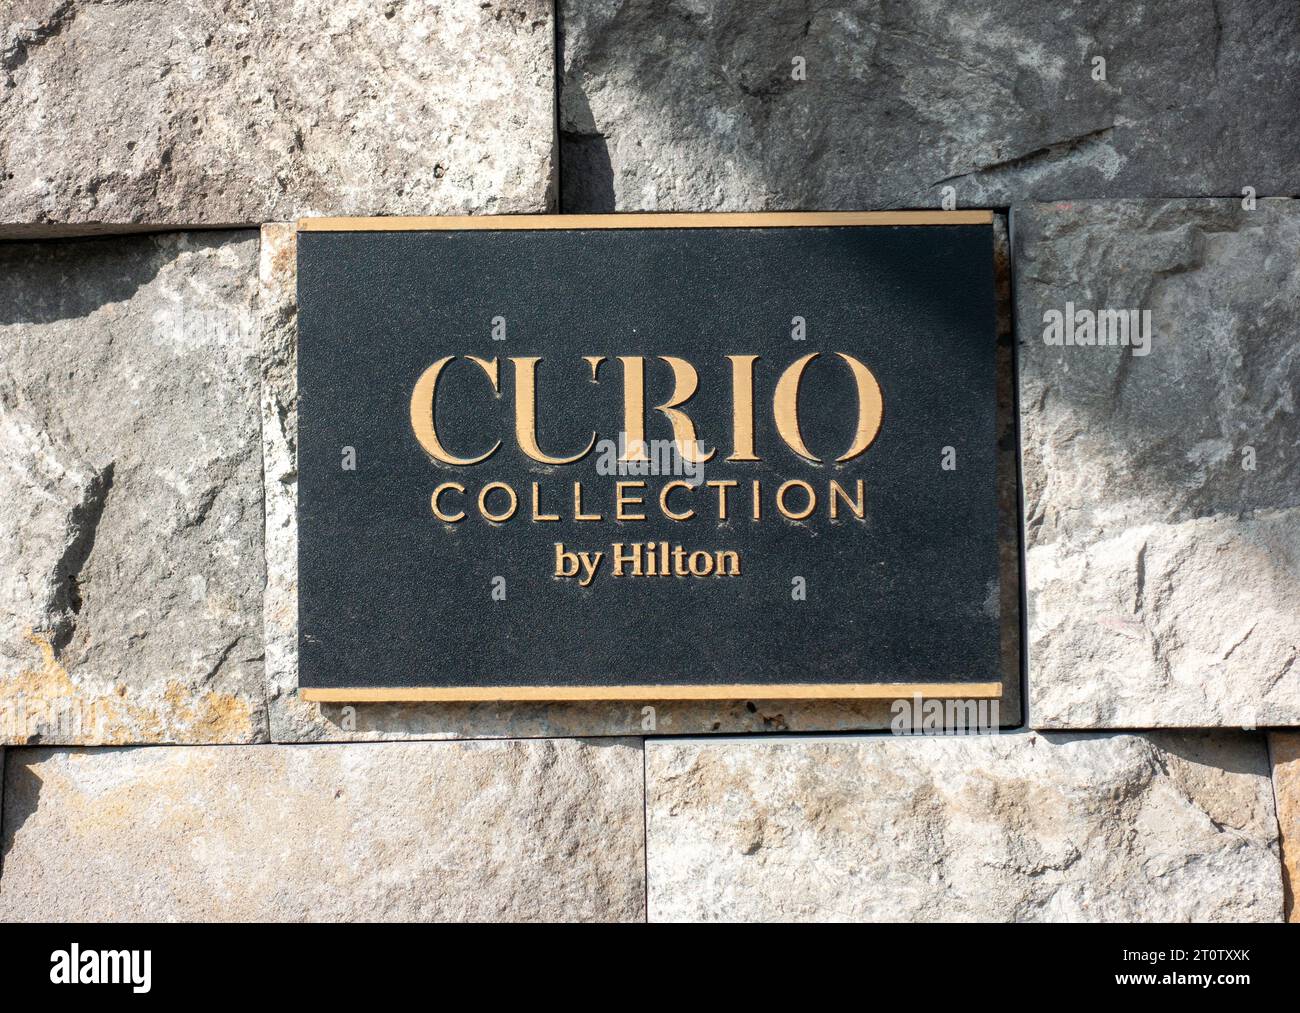 Curio Collection Hilton Hotel Sign Outside A Hotel In Reykjavik Iceland Curio Collection Are Boutique Hotels With An Individual locally Based Theme In Stock Photo